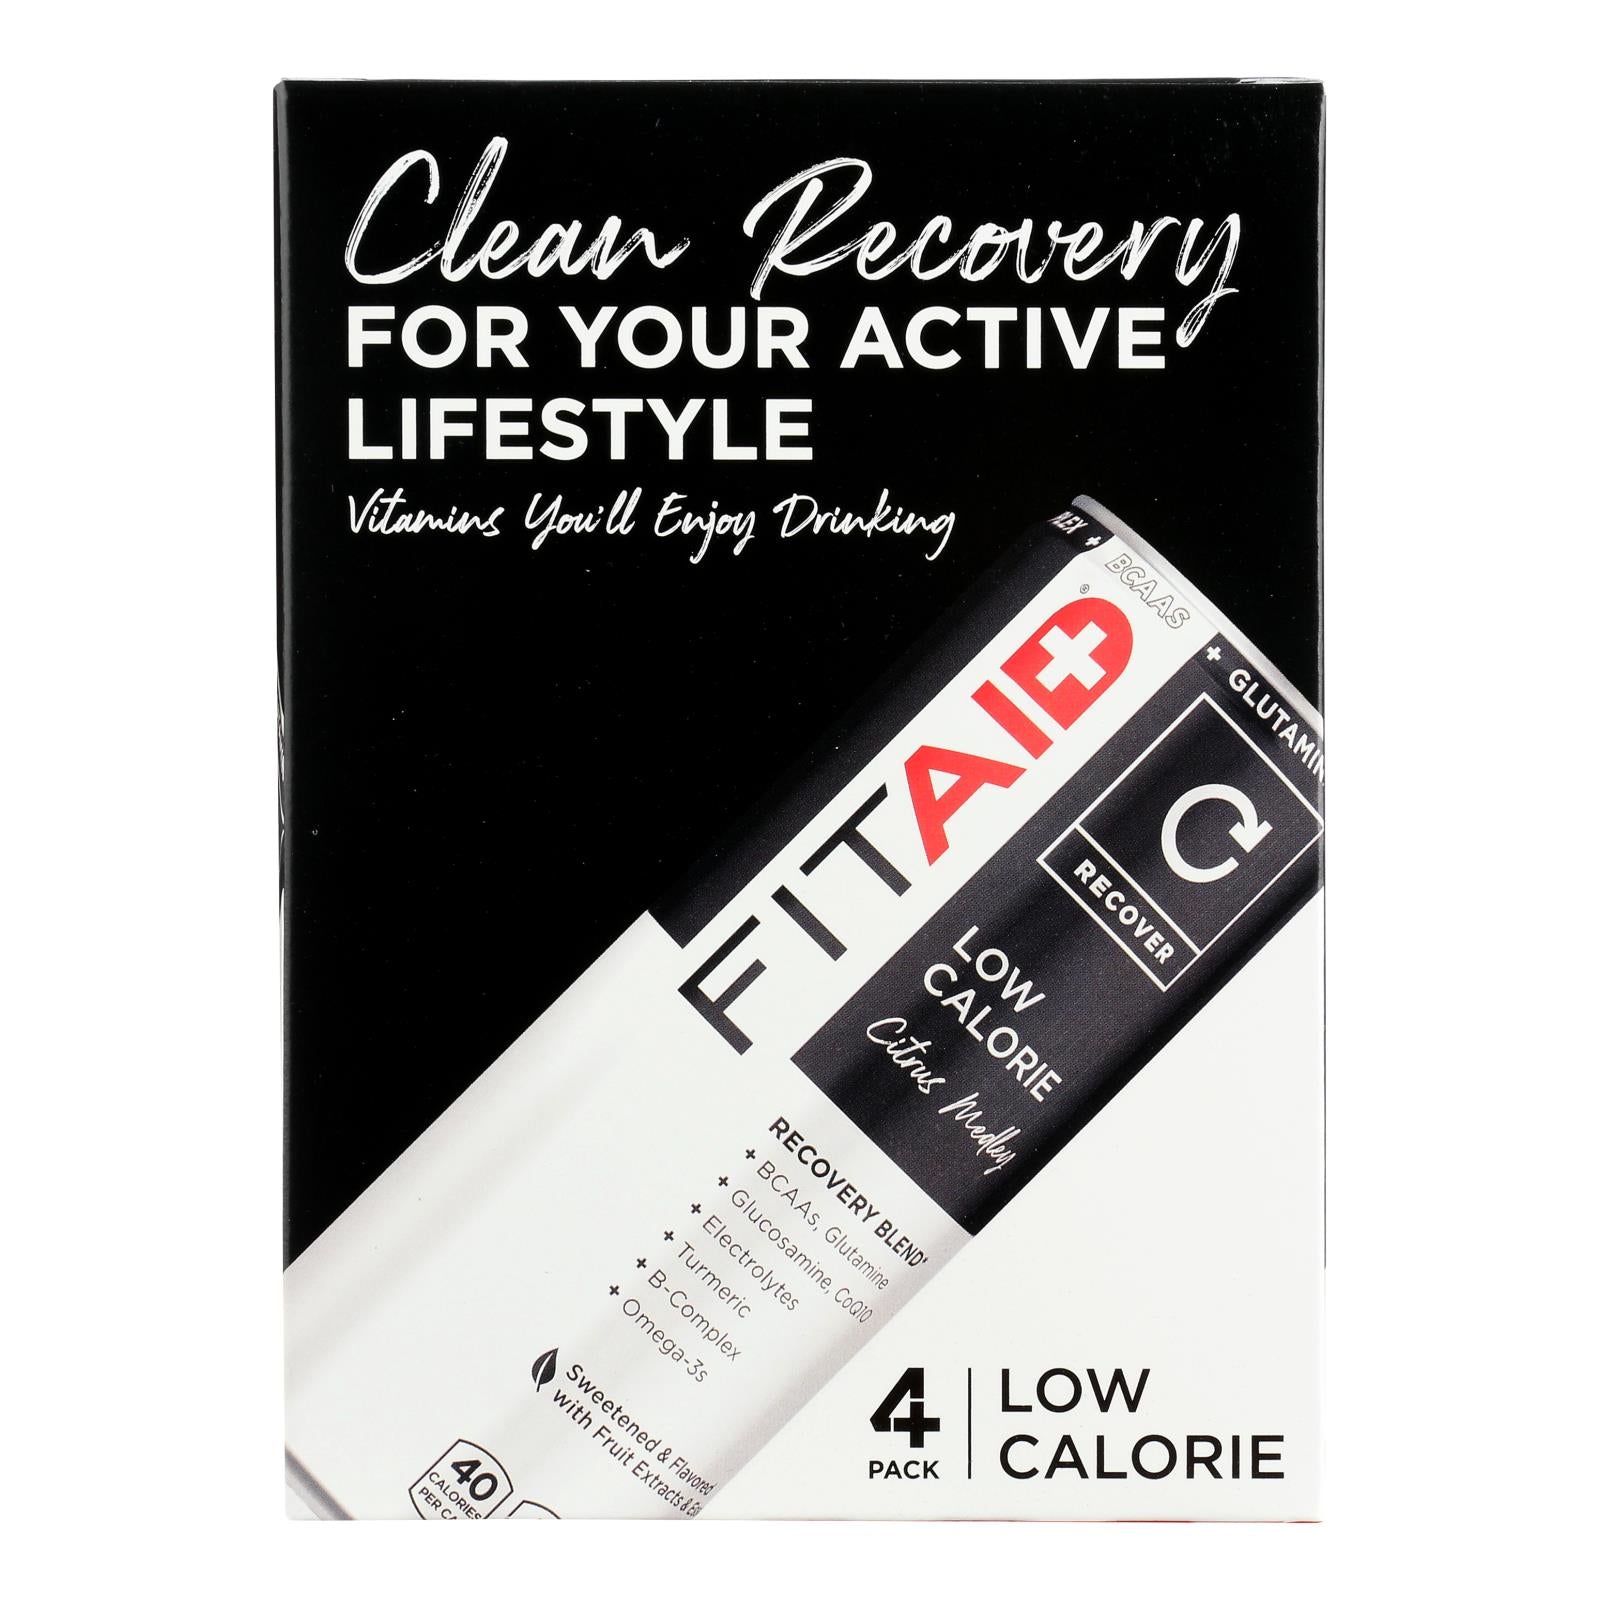 Lifeaid Beverage Company - Fitaid - Case Of 6-4/12 Fz